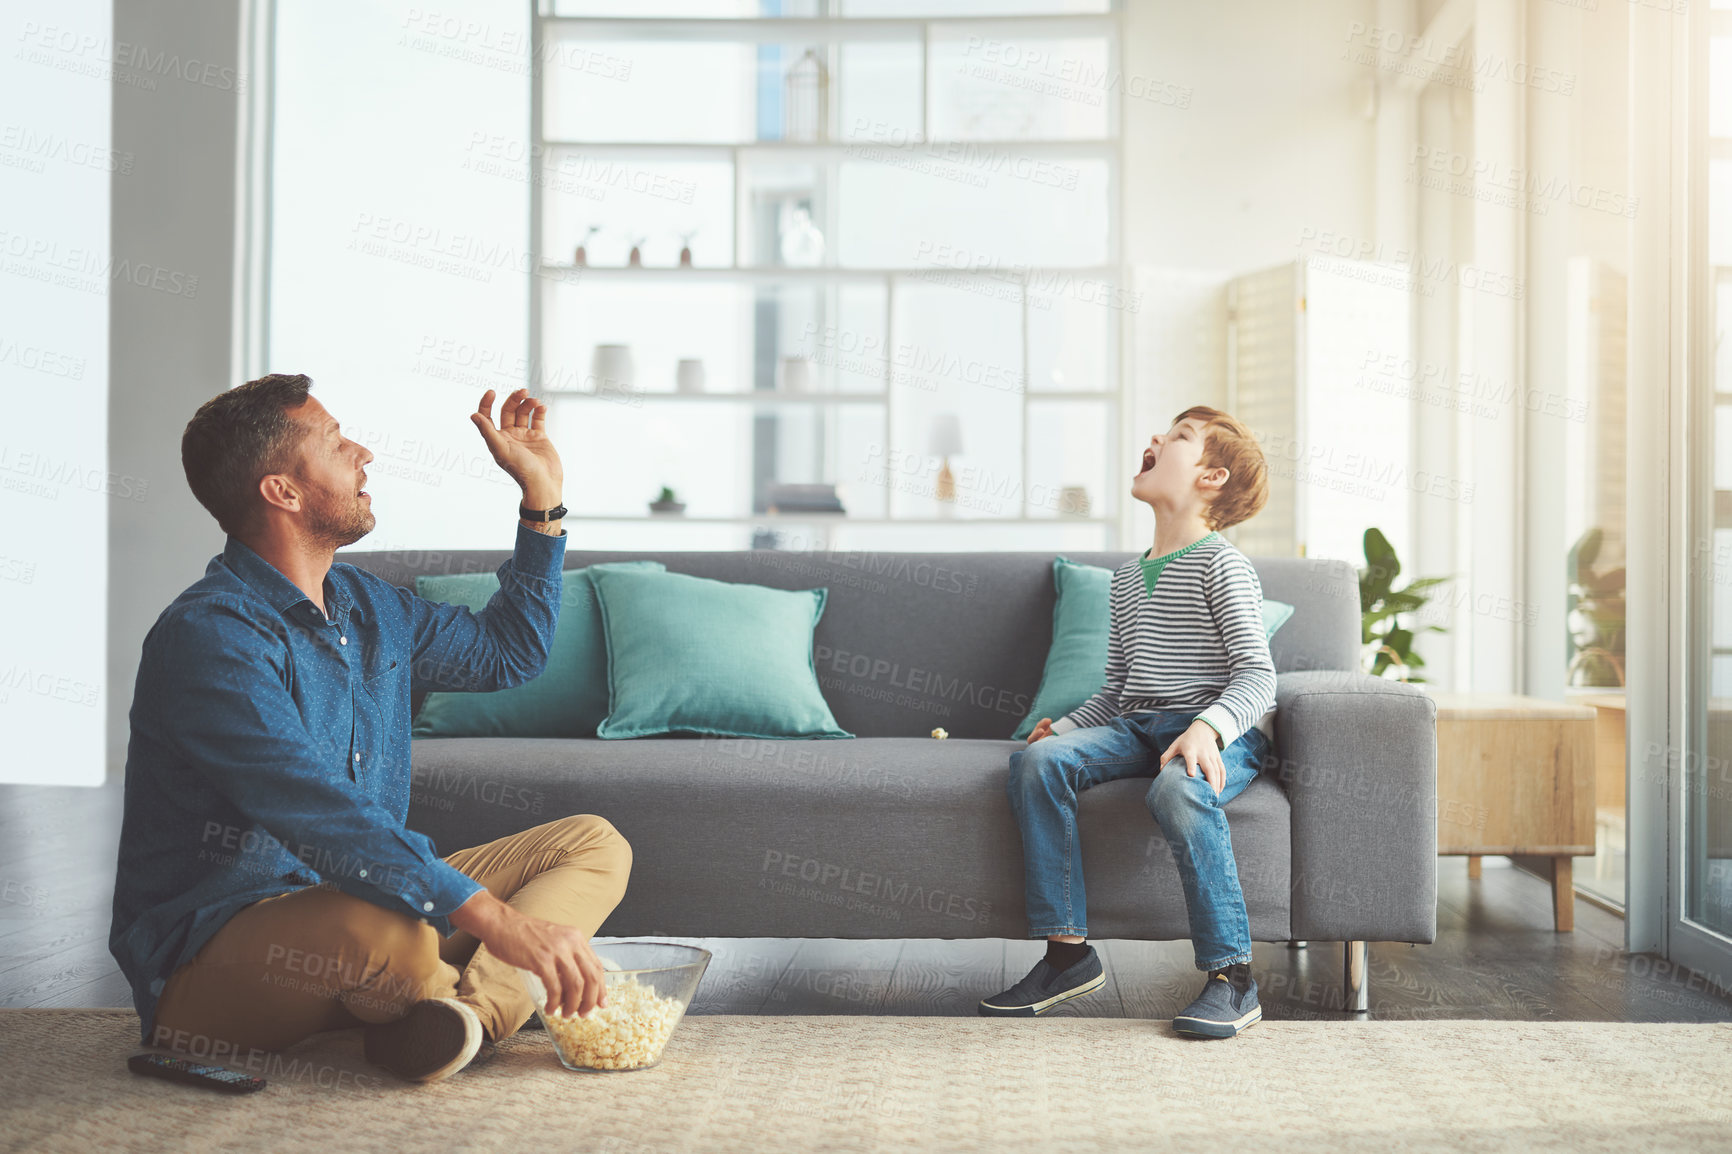 Buy stock photo Shot of a carefree little boy and his father playing around in the living room at home during the day